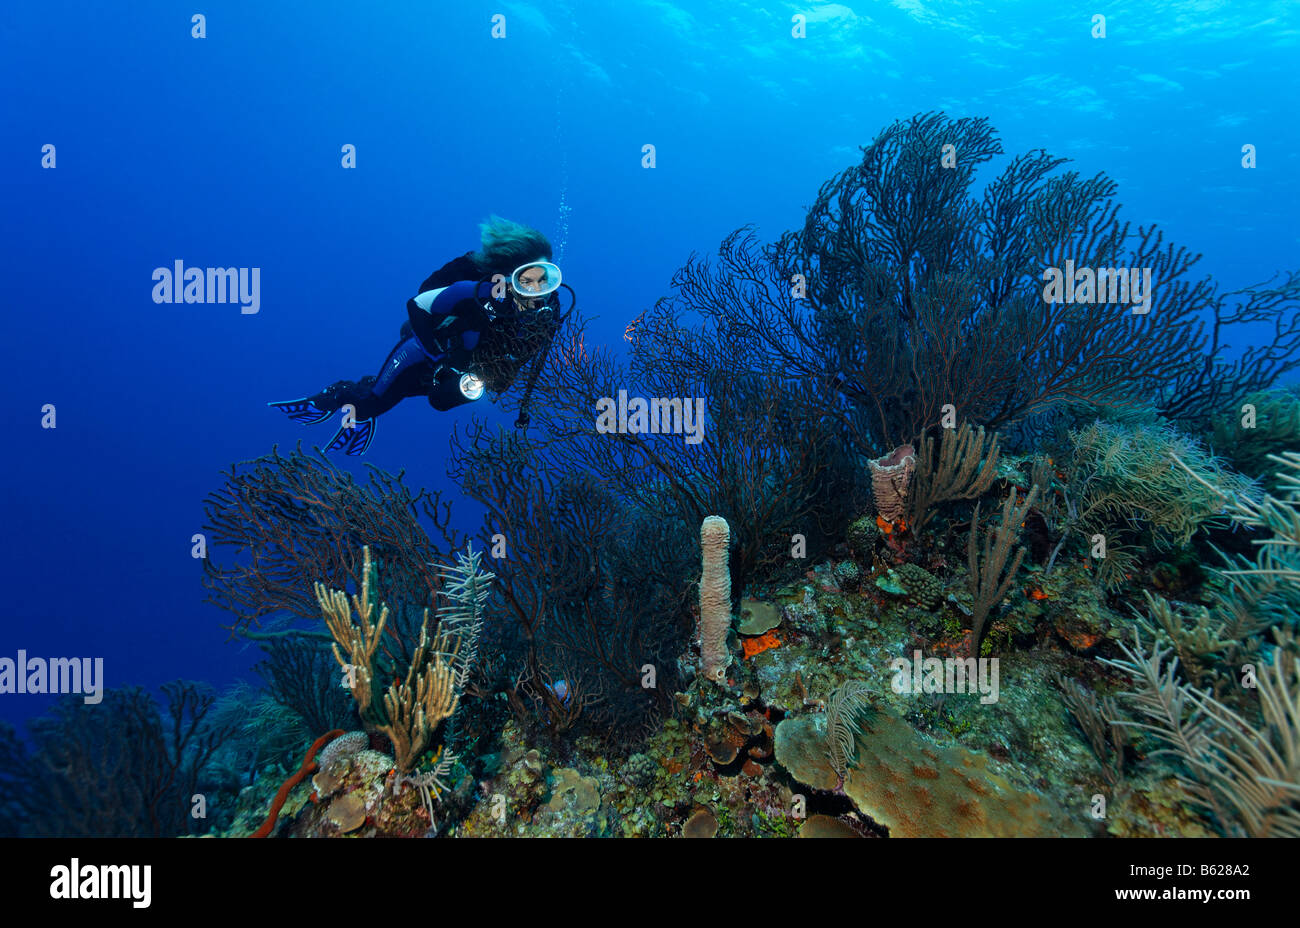 Female diver with a lamp looking at a deep-water sea fan (Iciligorgia schrammi) on a reef ledge in the coral reef with various  Stock Photo